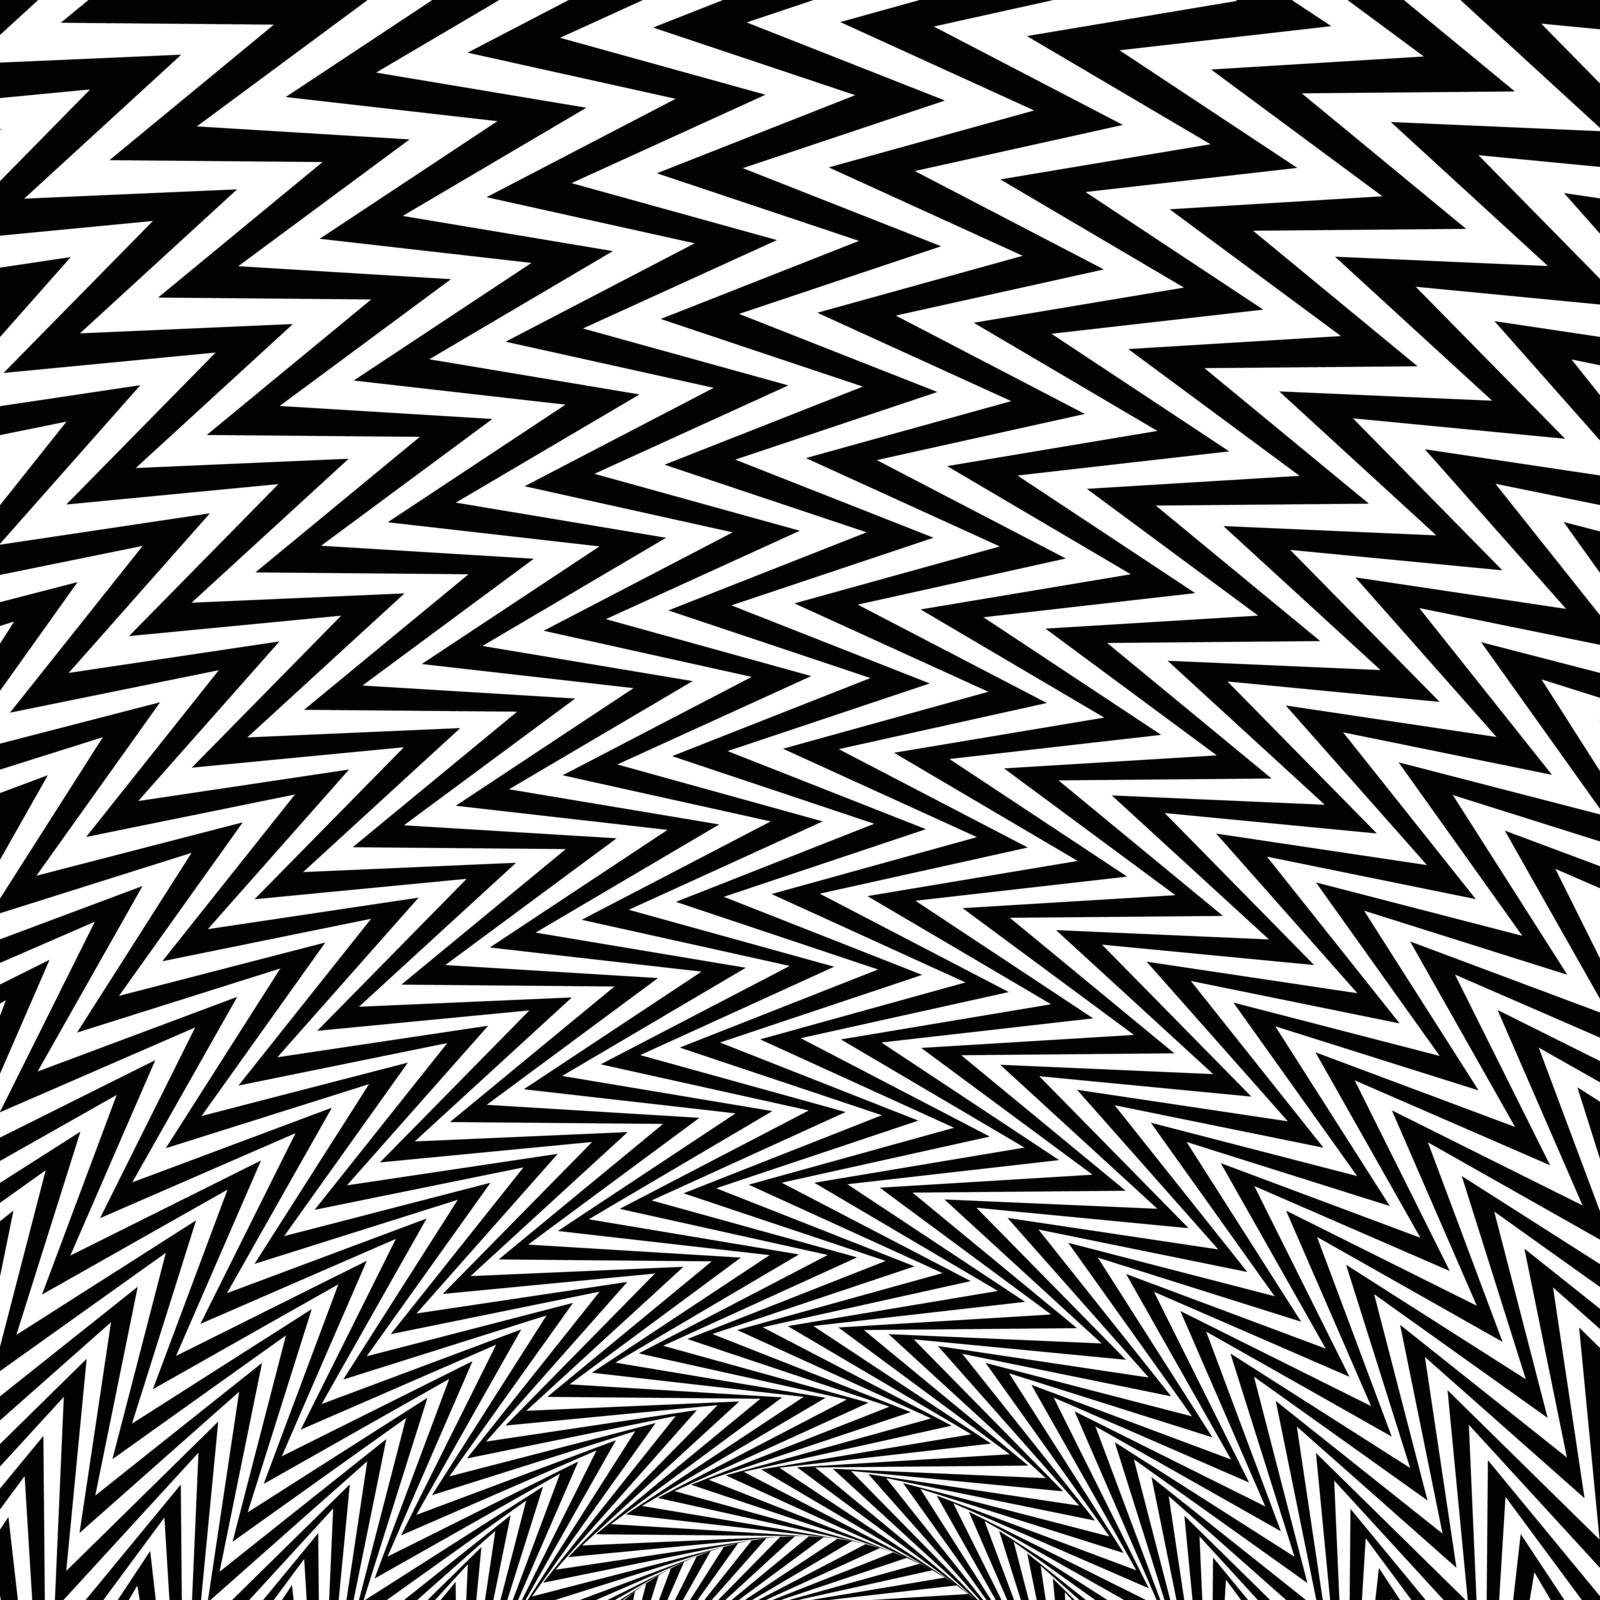 Abstract starburst background with zigzag, wavy lines by 3dvector